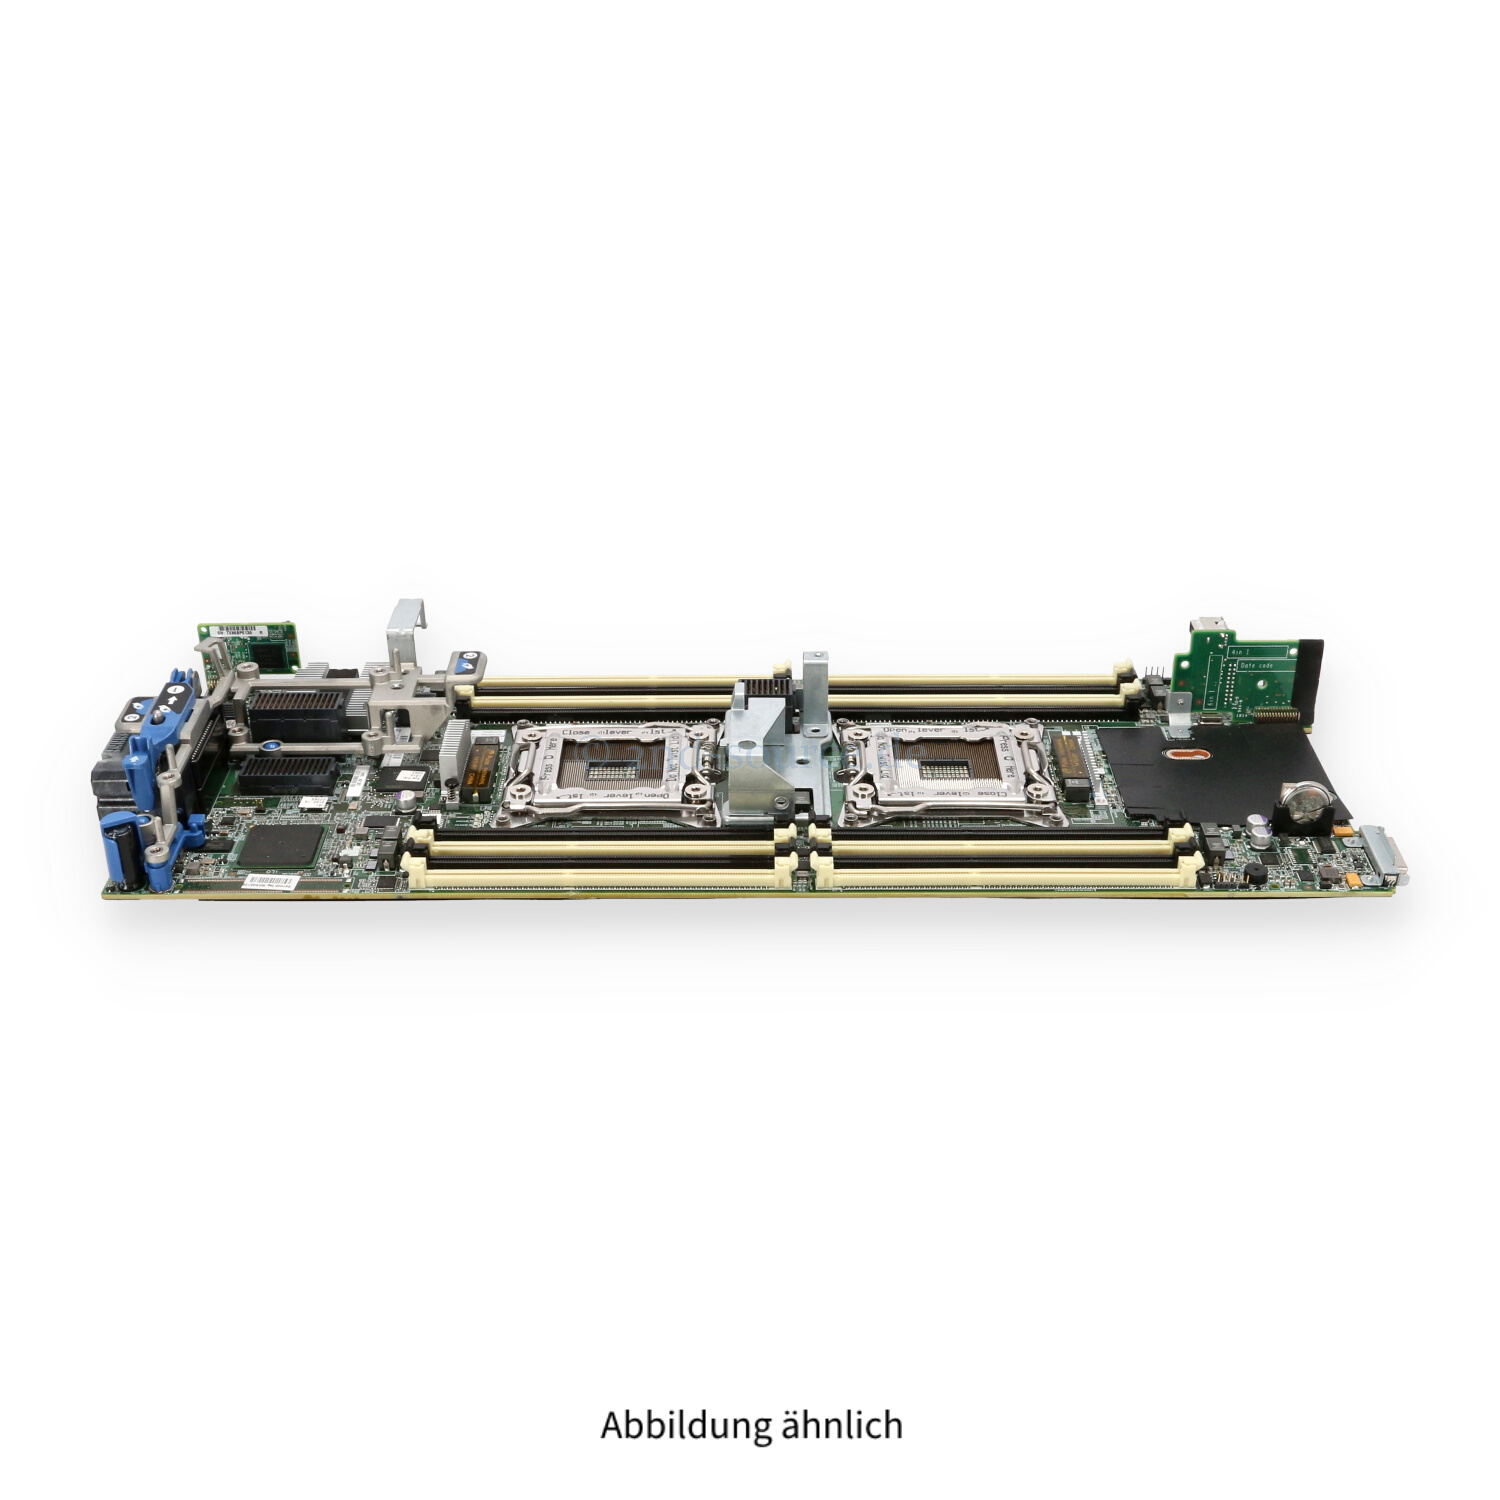 HPE Systemboard BL460c G8 719592-001